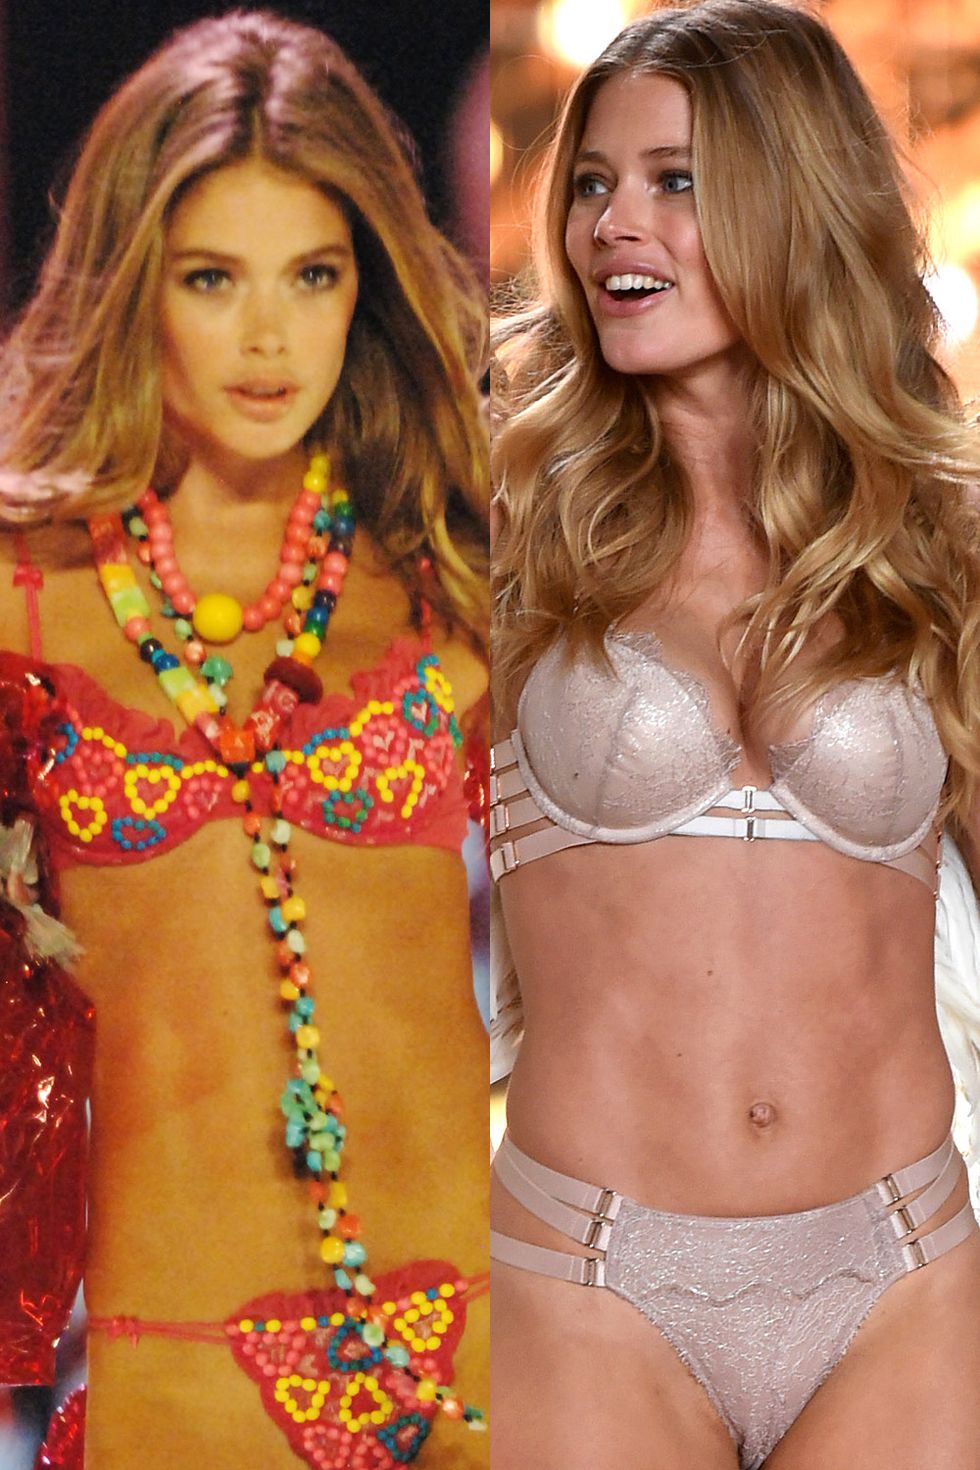 Victoria's Secret revealed why they don't cast transgender and